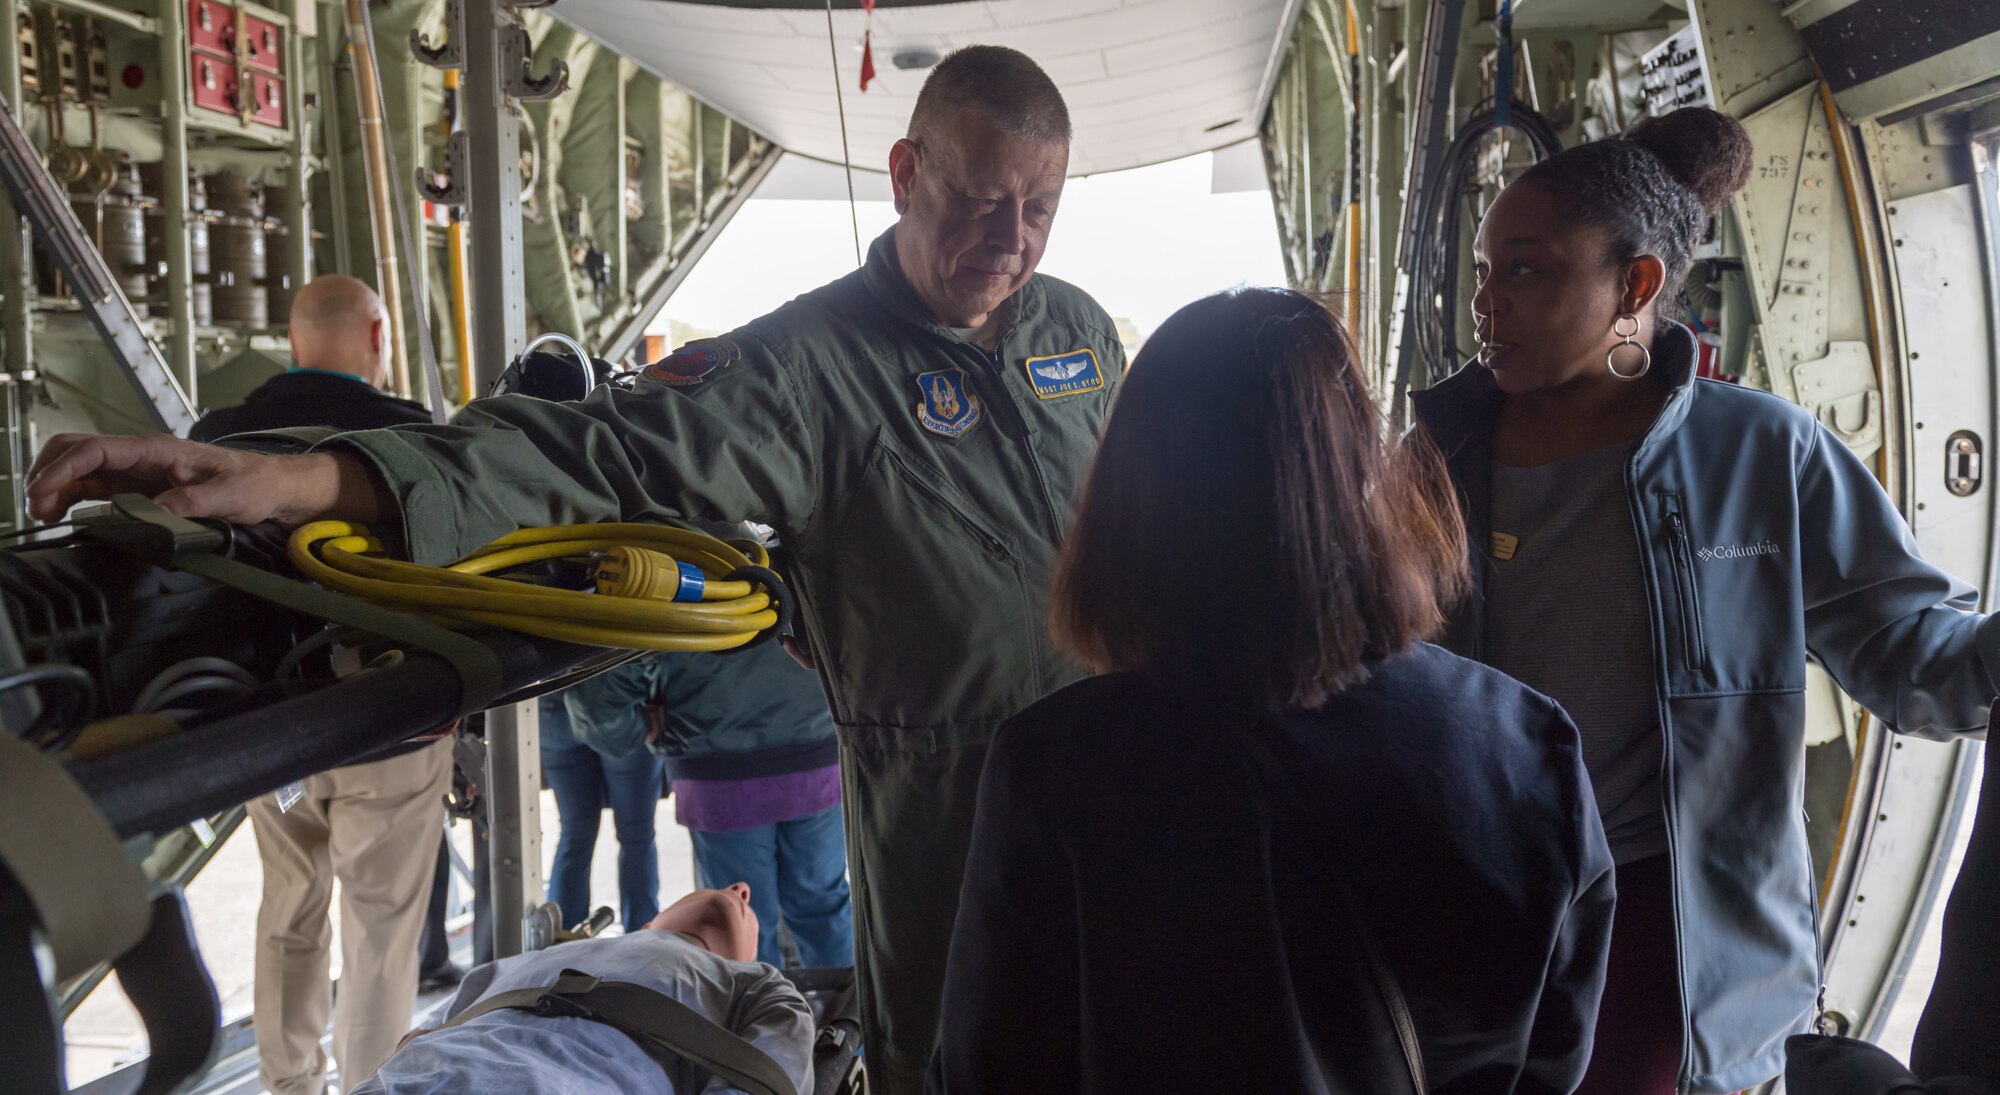 U.S. Air Force Master Sgt. Joe Byrd, 36th Aeromedical Evacuation Squadron aeromedical technician, discusses on-board medical procedures to Keesler honorary commanders inside a WC-130J Hercules during the 403rd Wing Honorary Commanders Tour at Keesler Air Force Base, Mississippi, March 08, 2019. The tour was intended to familiarize honorary commanders with the 403rd Wing and the Air Force Reserve mission and capabilities. The event also included an incentive flight on a WC-130J Hercules. (U.S. Air Force Photo by Andre' Askew)